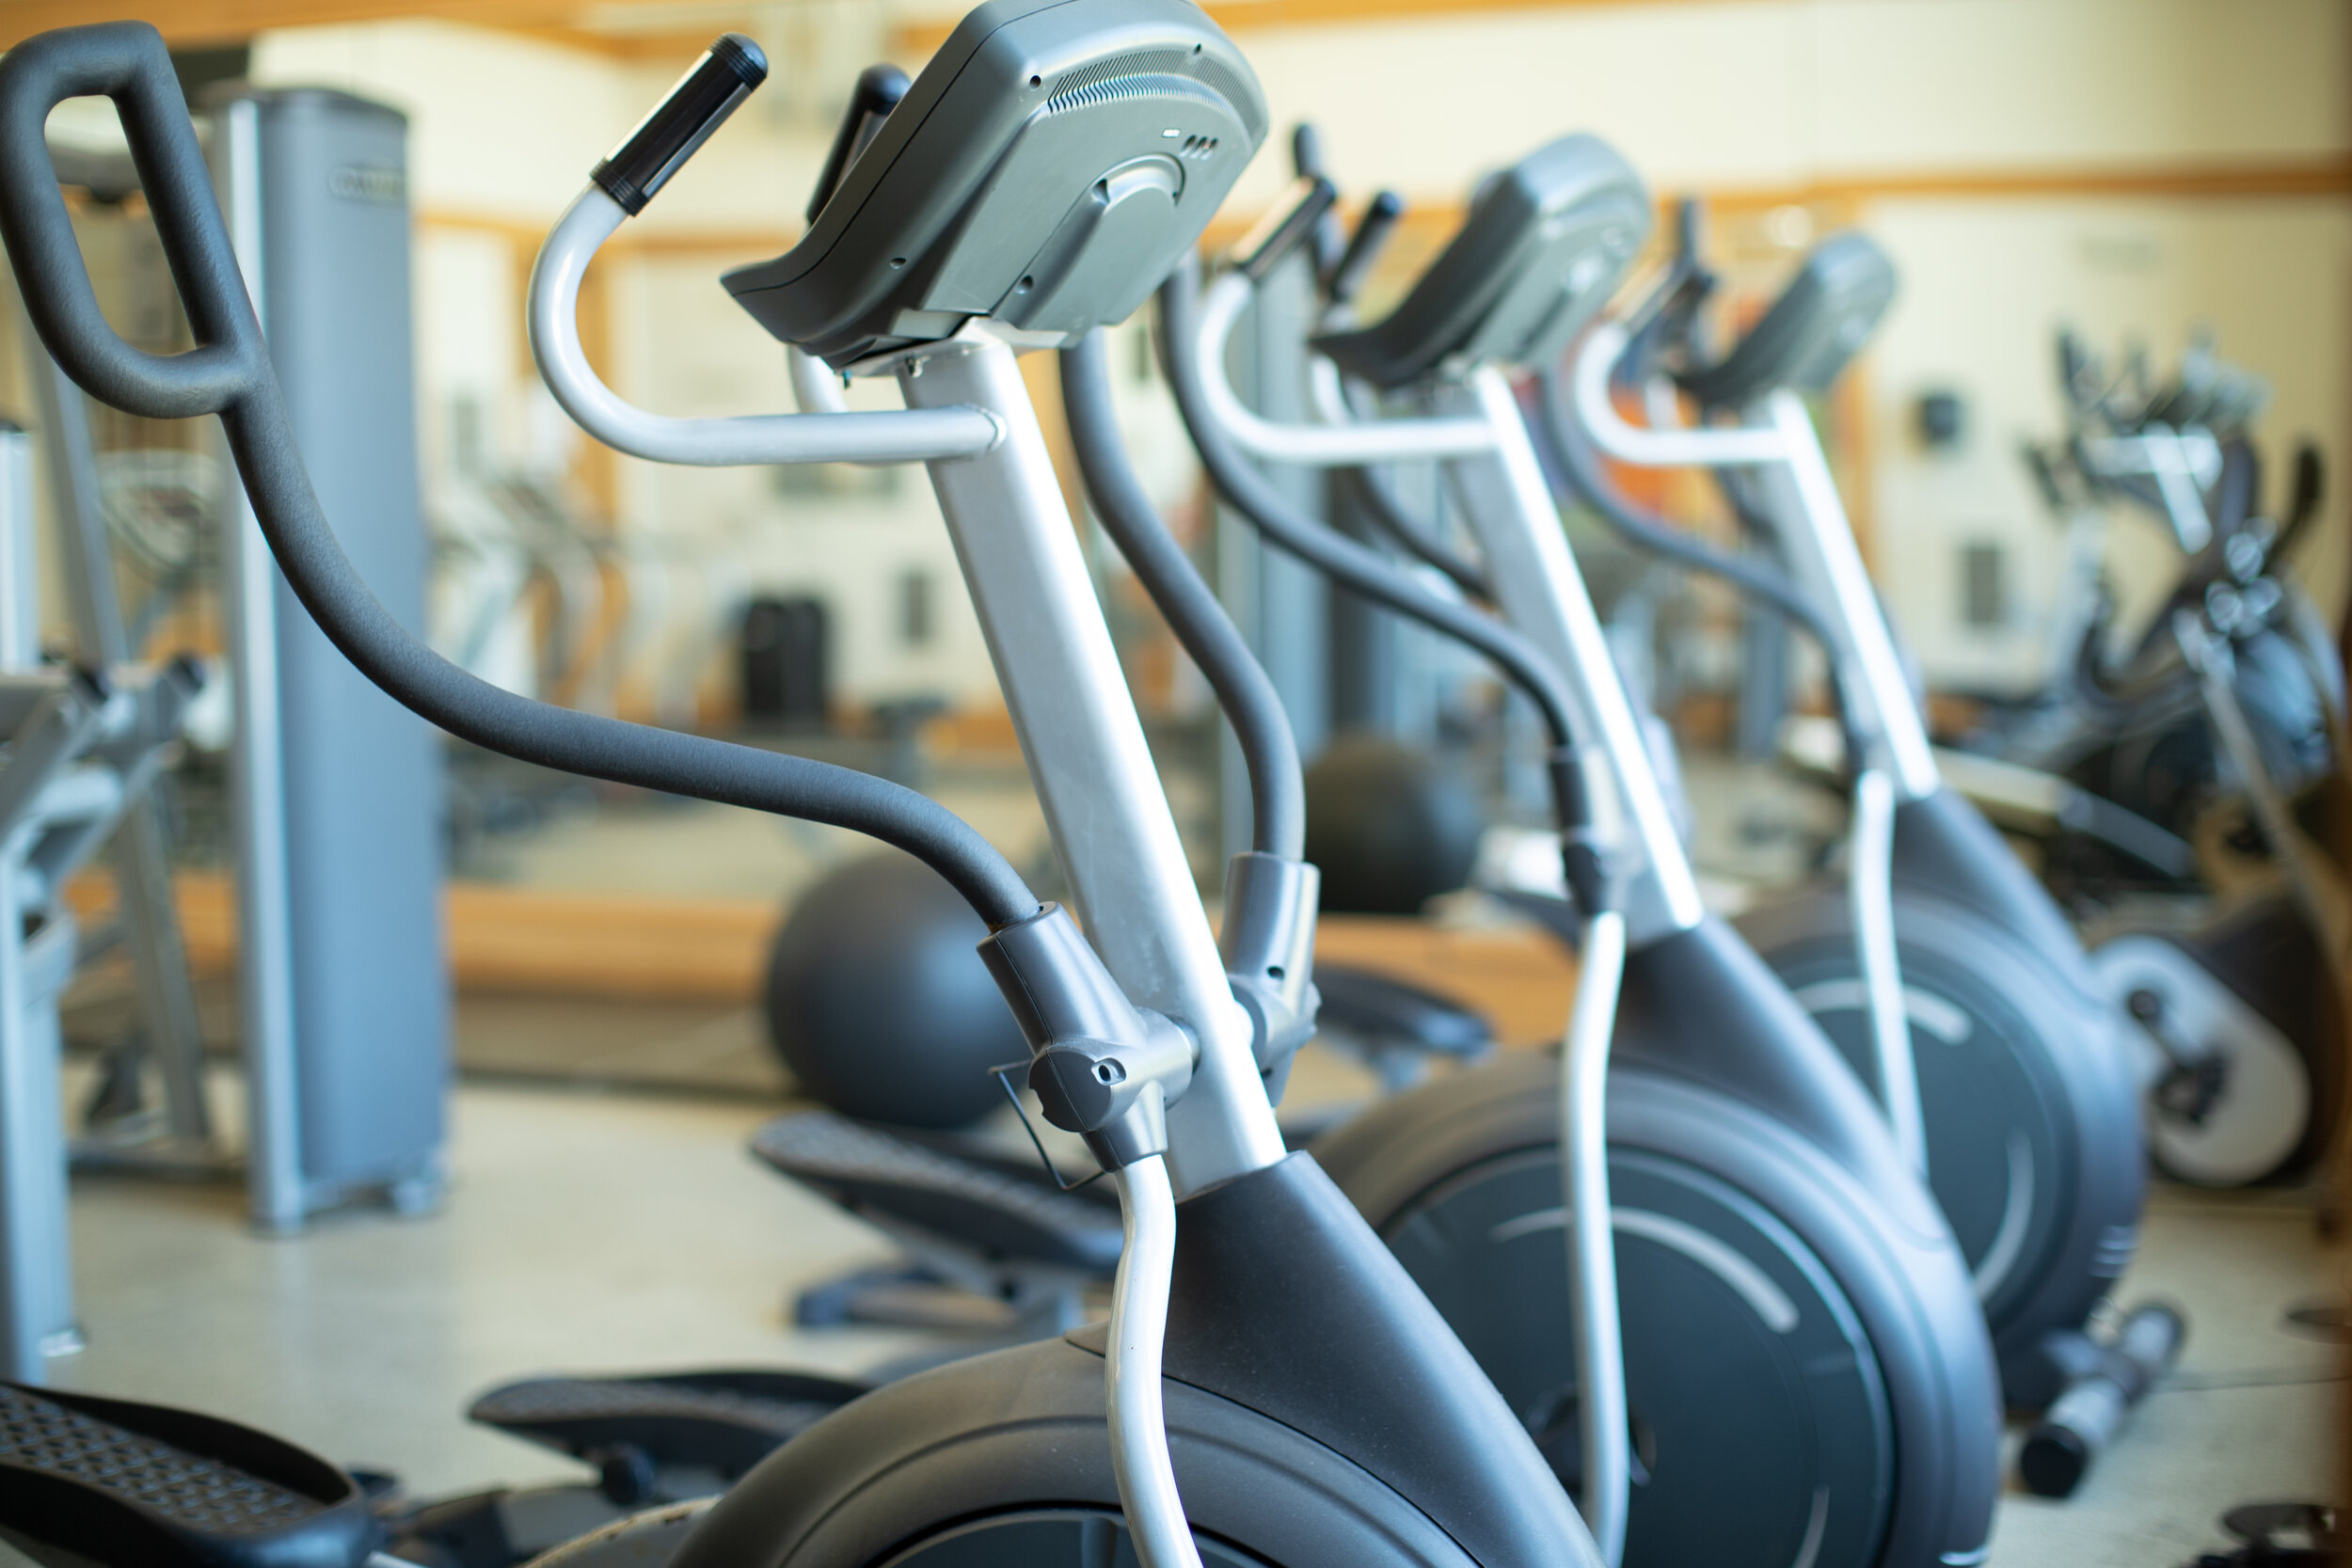 The Villages at Belvoir offers a fully-equipped fitness center.